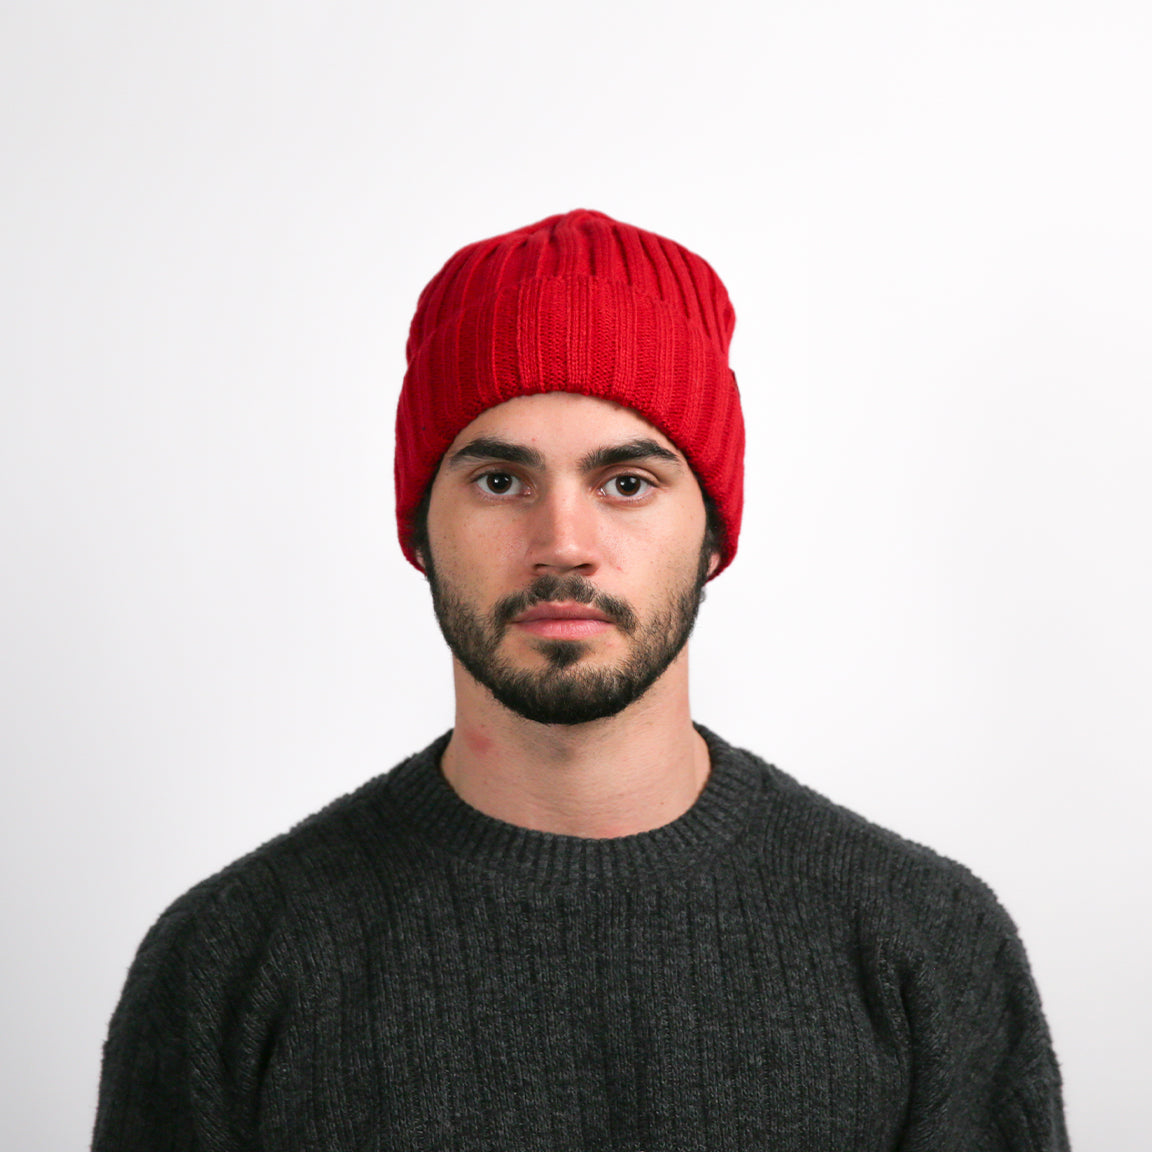 A person facing forward, wearing a vibrant red, ribbed beanie that sits snugly on the head. The beanie is folded at the brim where a small, white triangular logo is visible. The beanie has a relaxed fit at the top, suggesting a slight slouch. The person is also wearing a charcoal grey knit sweater with a prominent weave pattern.